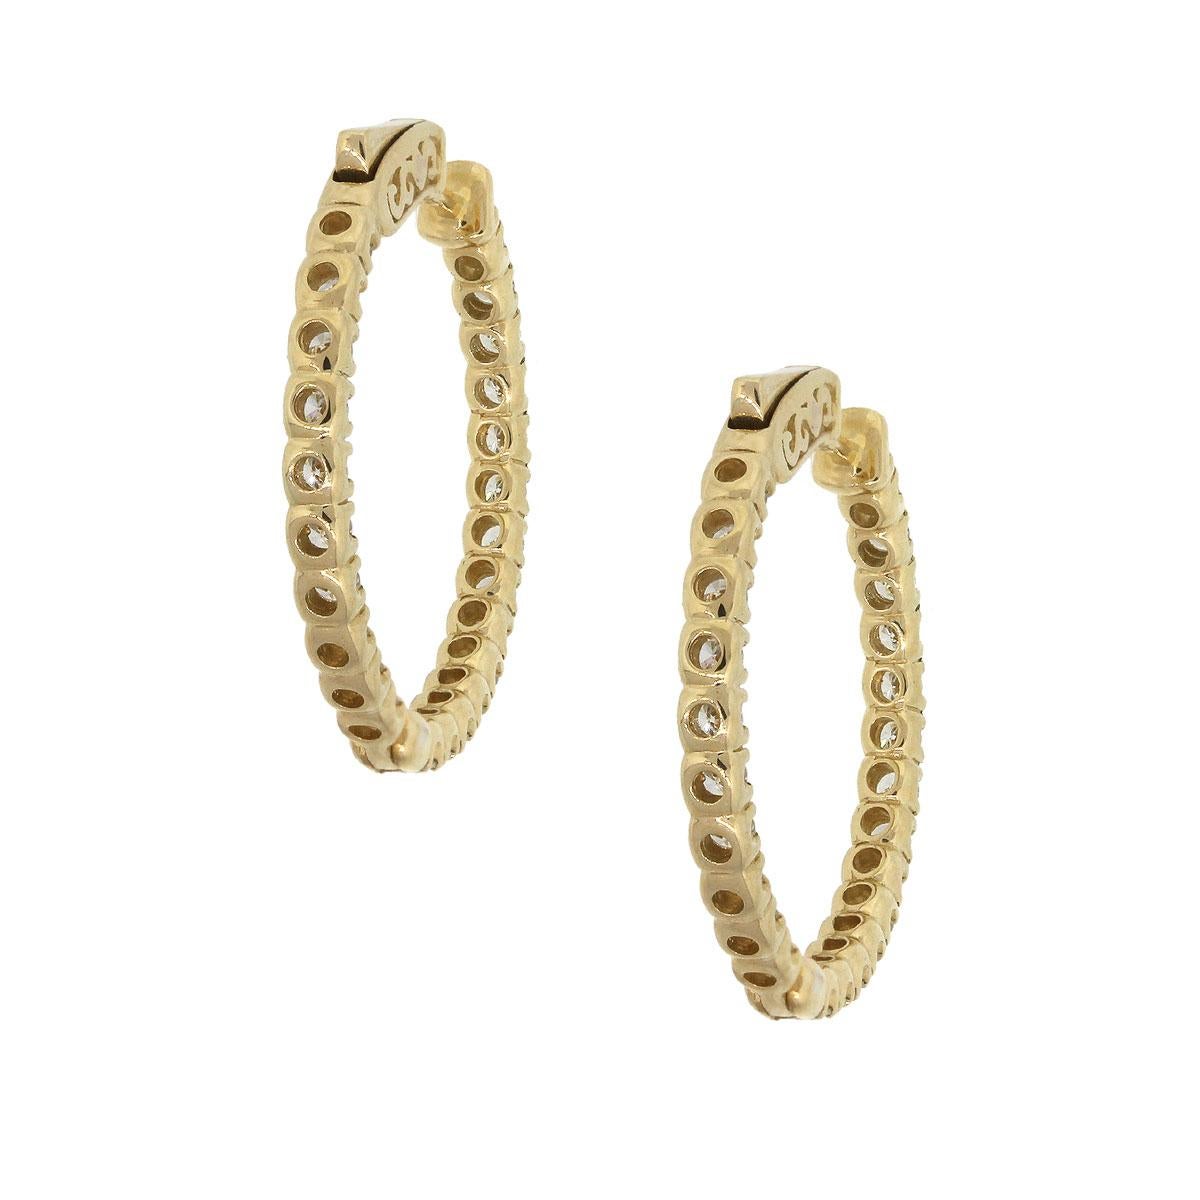 Material: 14k Yellow Gold
Style: Diamond Inside Out Hoops
Diamond Details: Approximately 1.63ctw of round brilliant diamonds. Diamonds are G/H in color and SI in clarity.
Earring Measurements: 1.04″ x 0.12″ x 1.03″
Total Weight: 6.7g